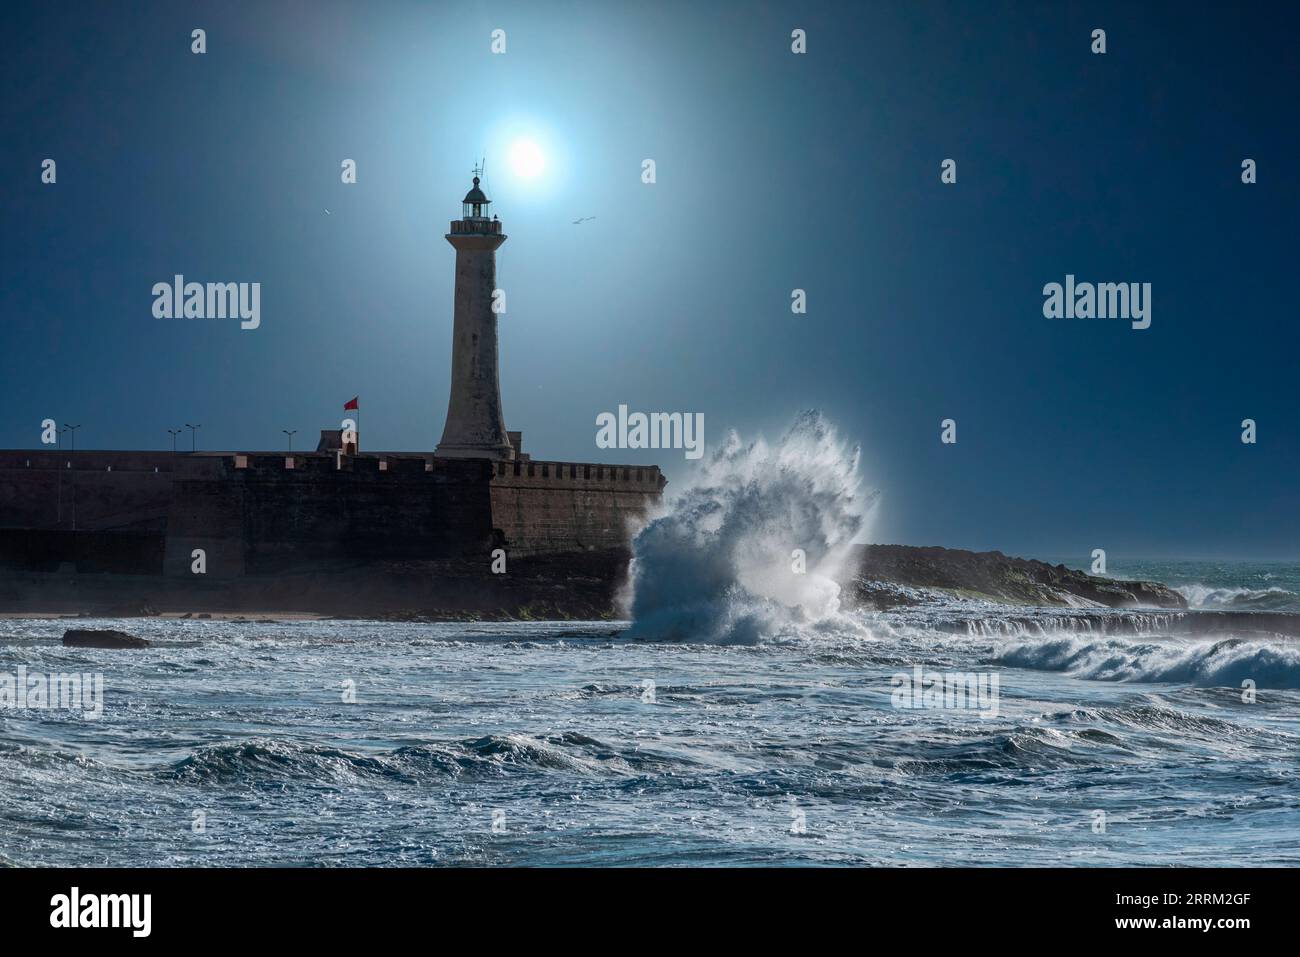 The moon shines over a picturesque lighthouse at night, waves break at the coast Stock Photo